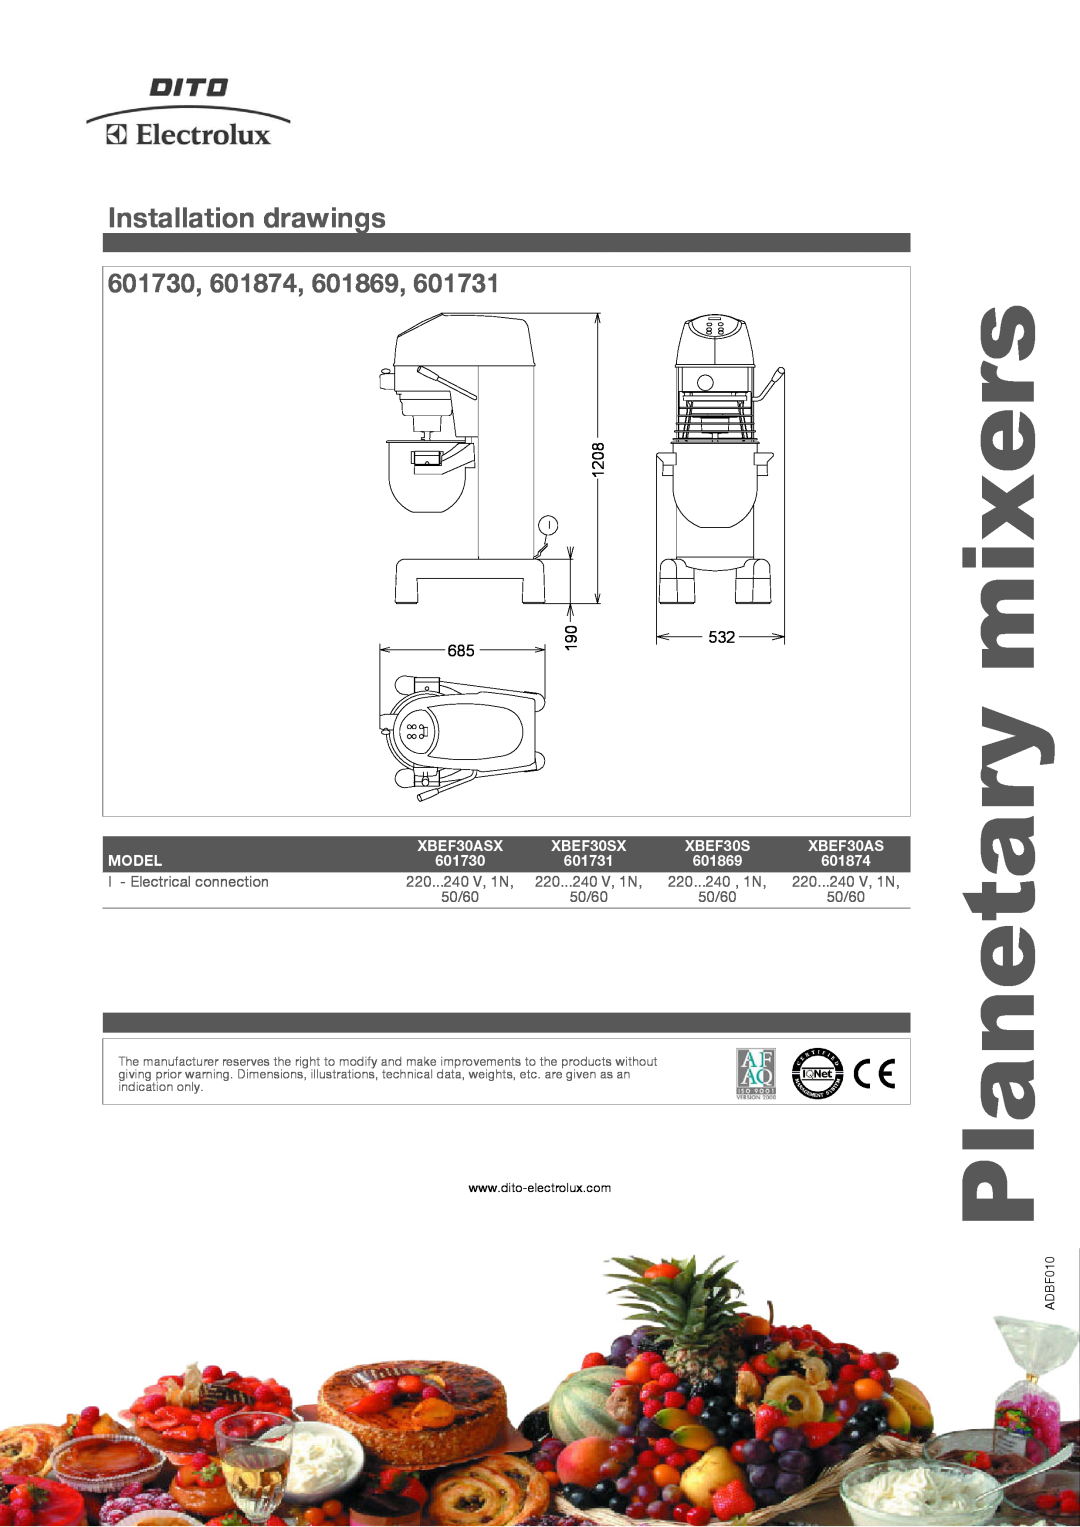 Electrolux XBEF30ASX, XBEF30SX, 601731 manual Installation drawings, mixers, Planetary, 601730, 601874, 601869 